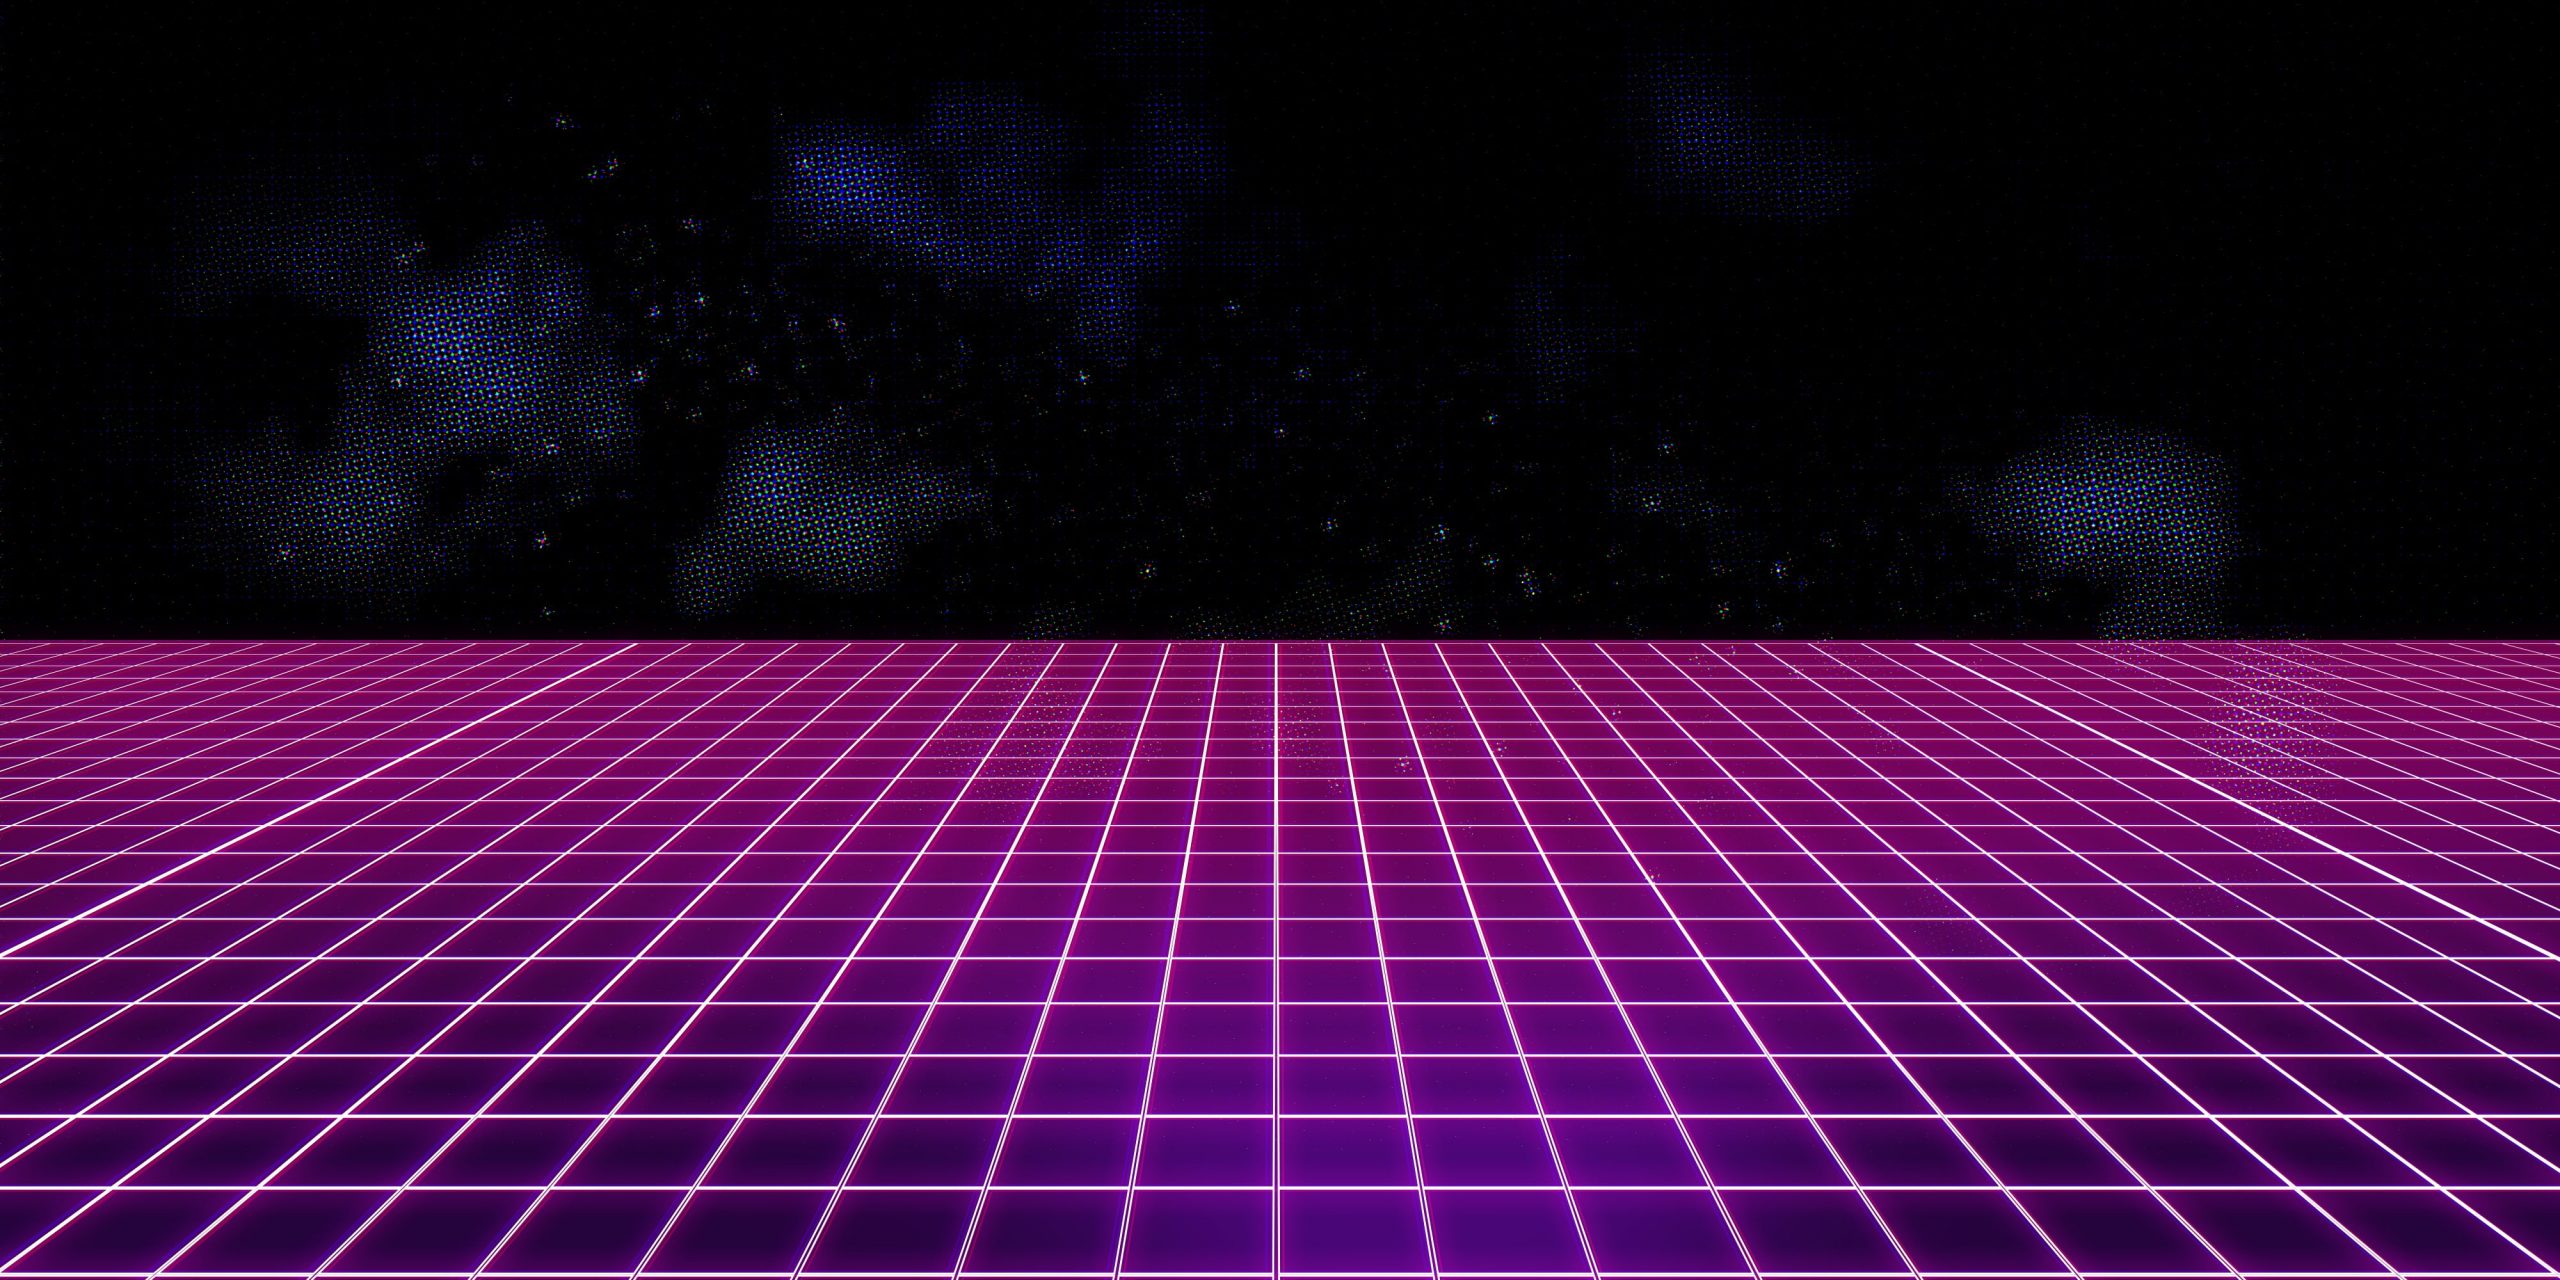 Music, Background, 80s wallpaper, Neon, VHS, 80’s, Synth, Retrowave, Synthwave